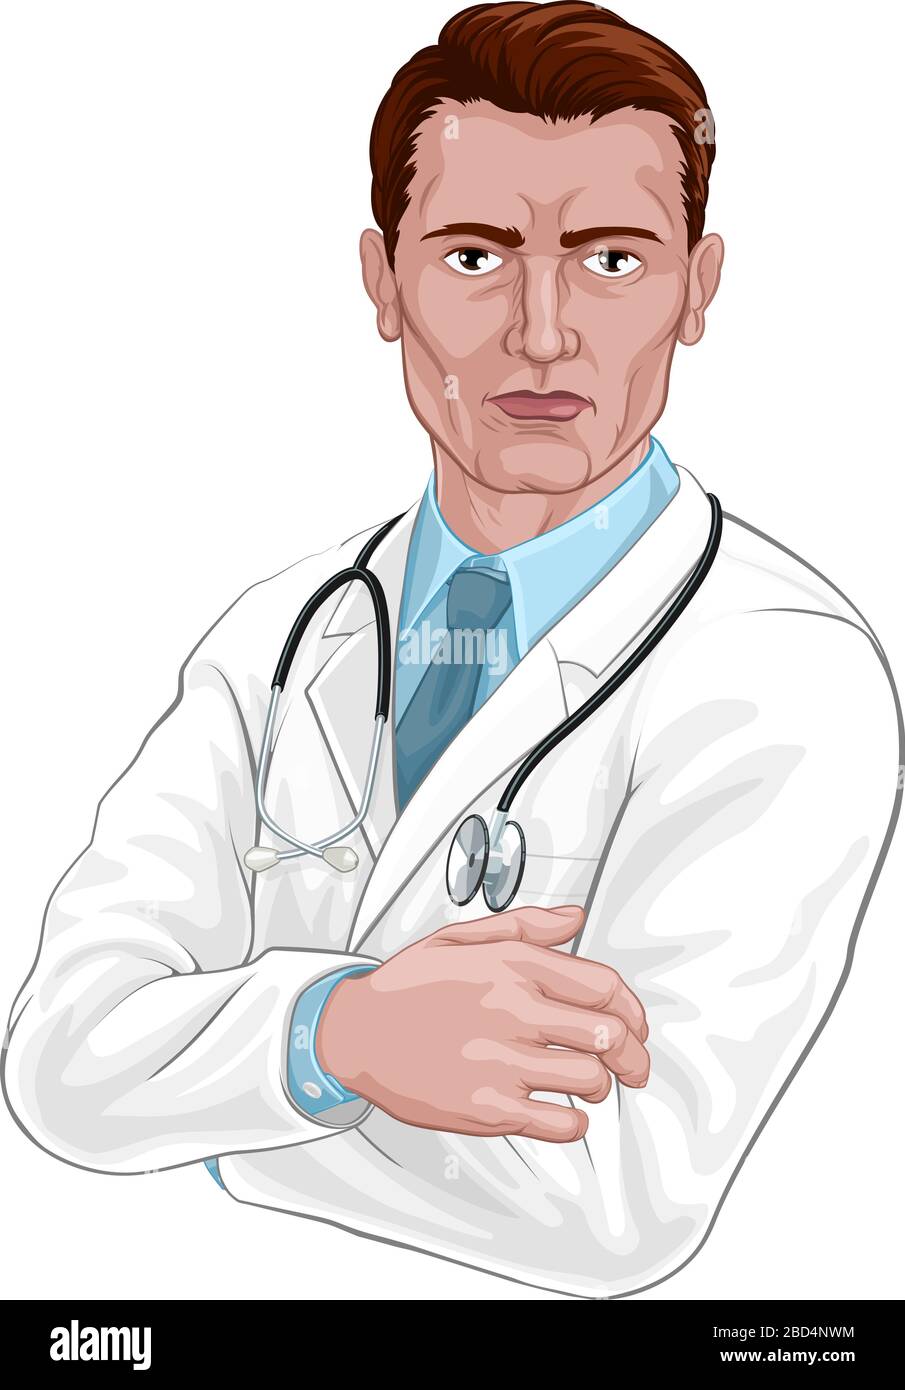 Professional Character Von Doctor Medical Healthcare Stock Vektor